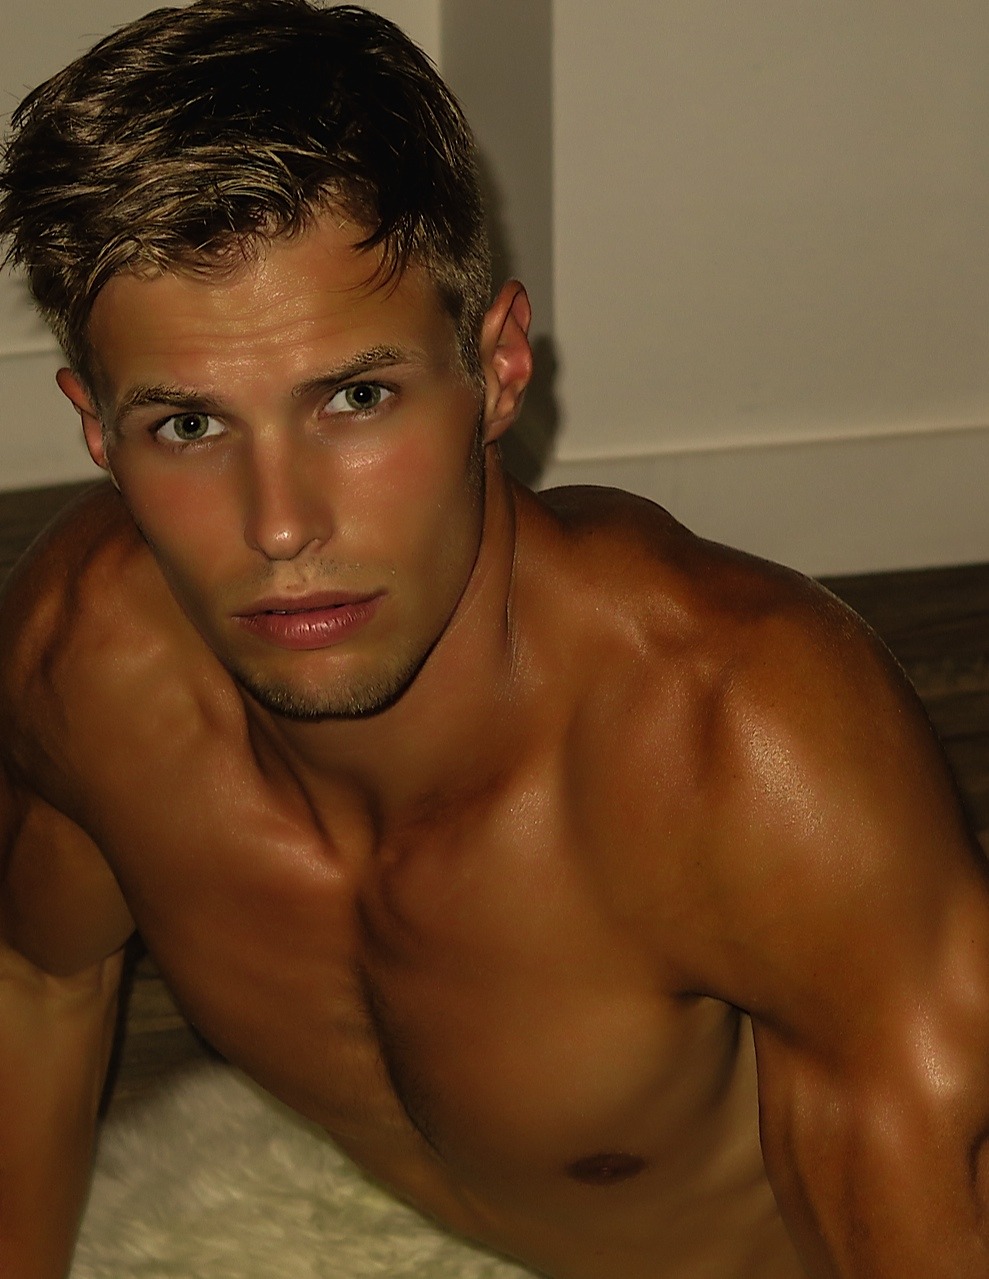 Model/actor SEAN ALBOUCQ by JOSEPH LALLY http://instagram.com/lallypop421